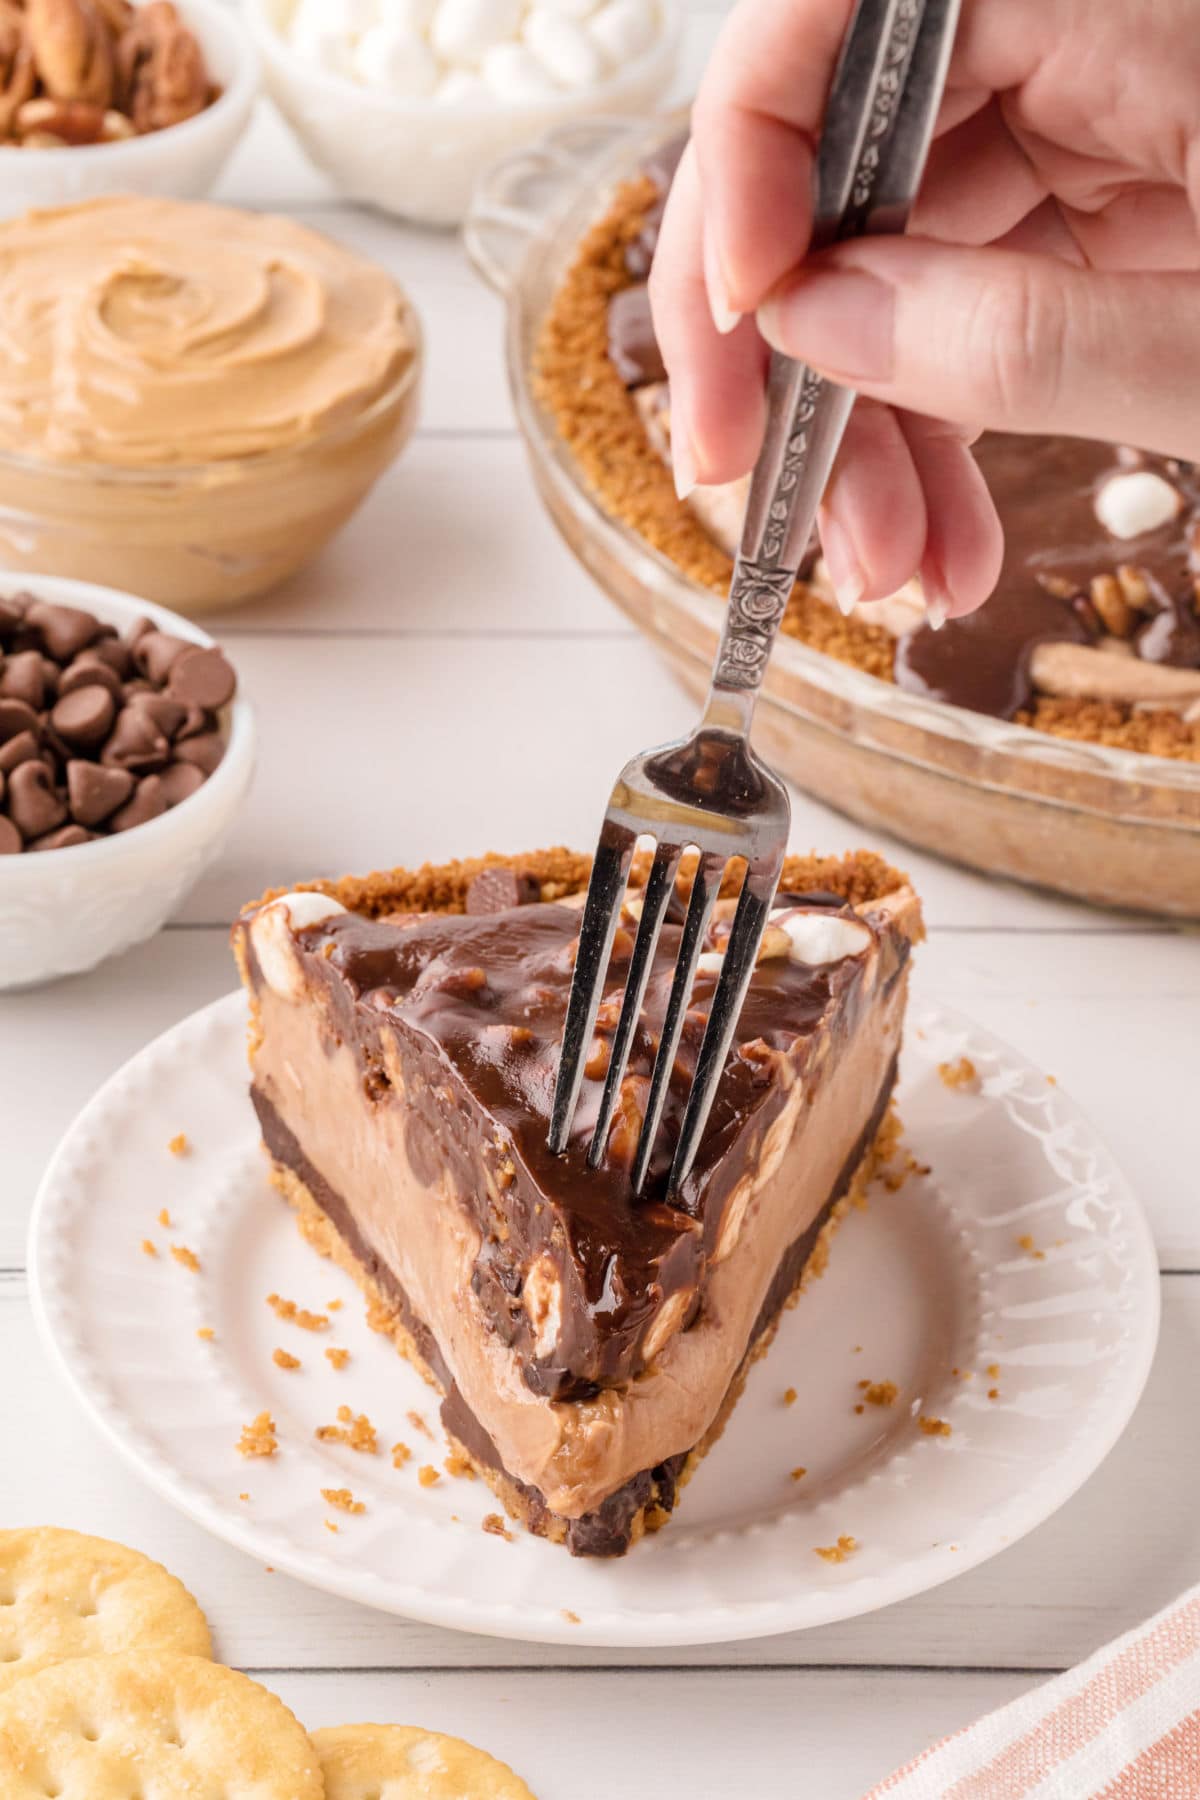 A slice of pie on a white plate with a fork.